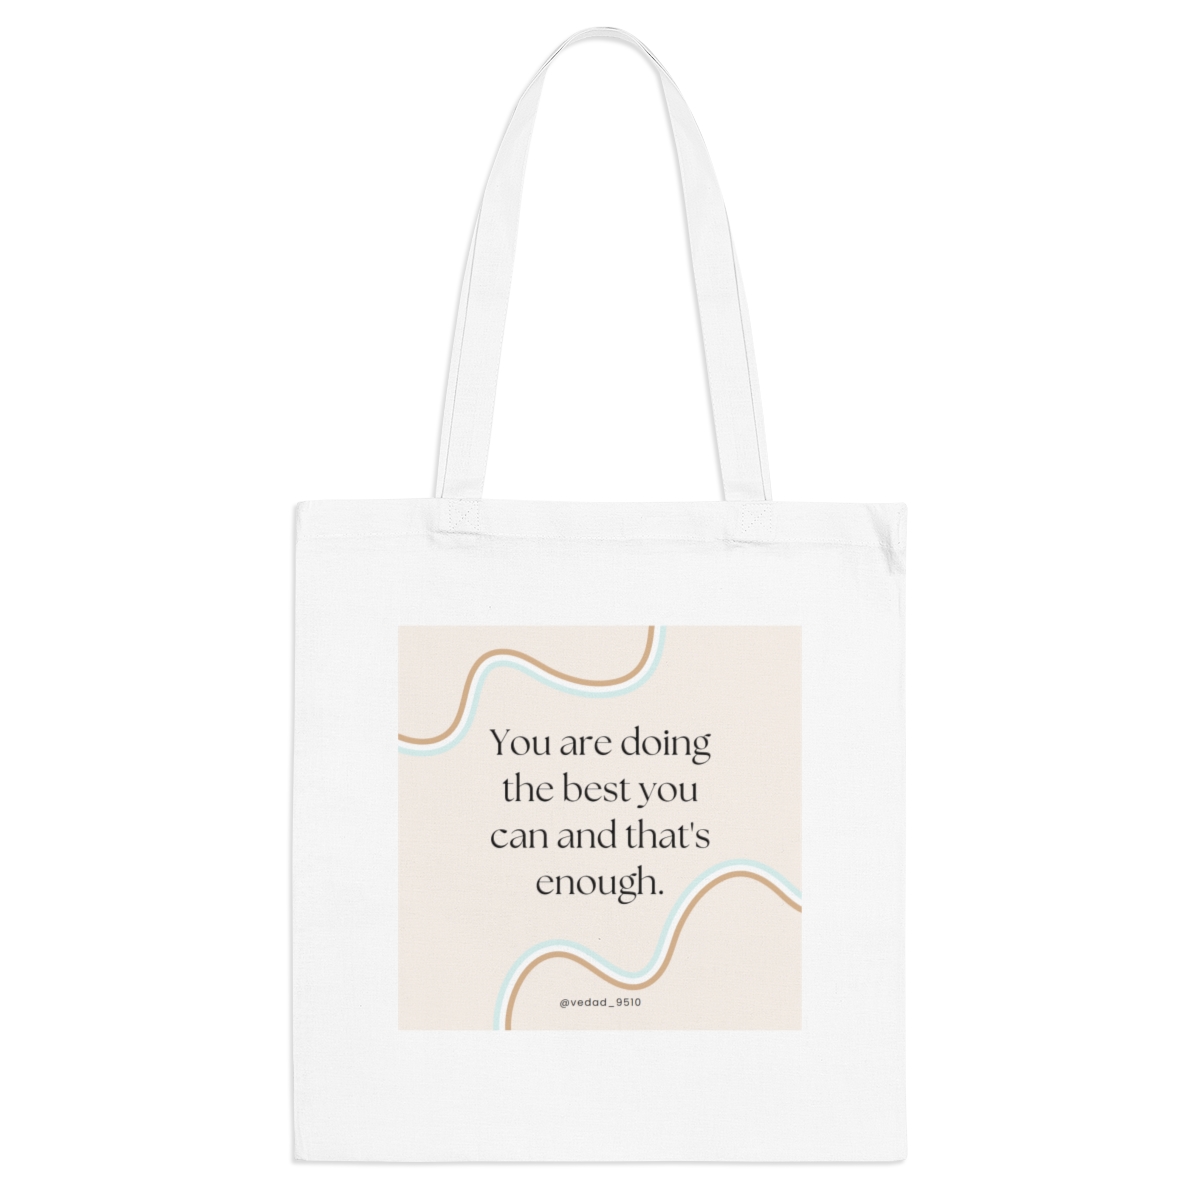 You are doing the best you can and that's enough - Tote Bag product main image